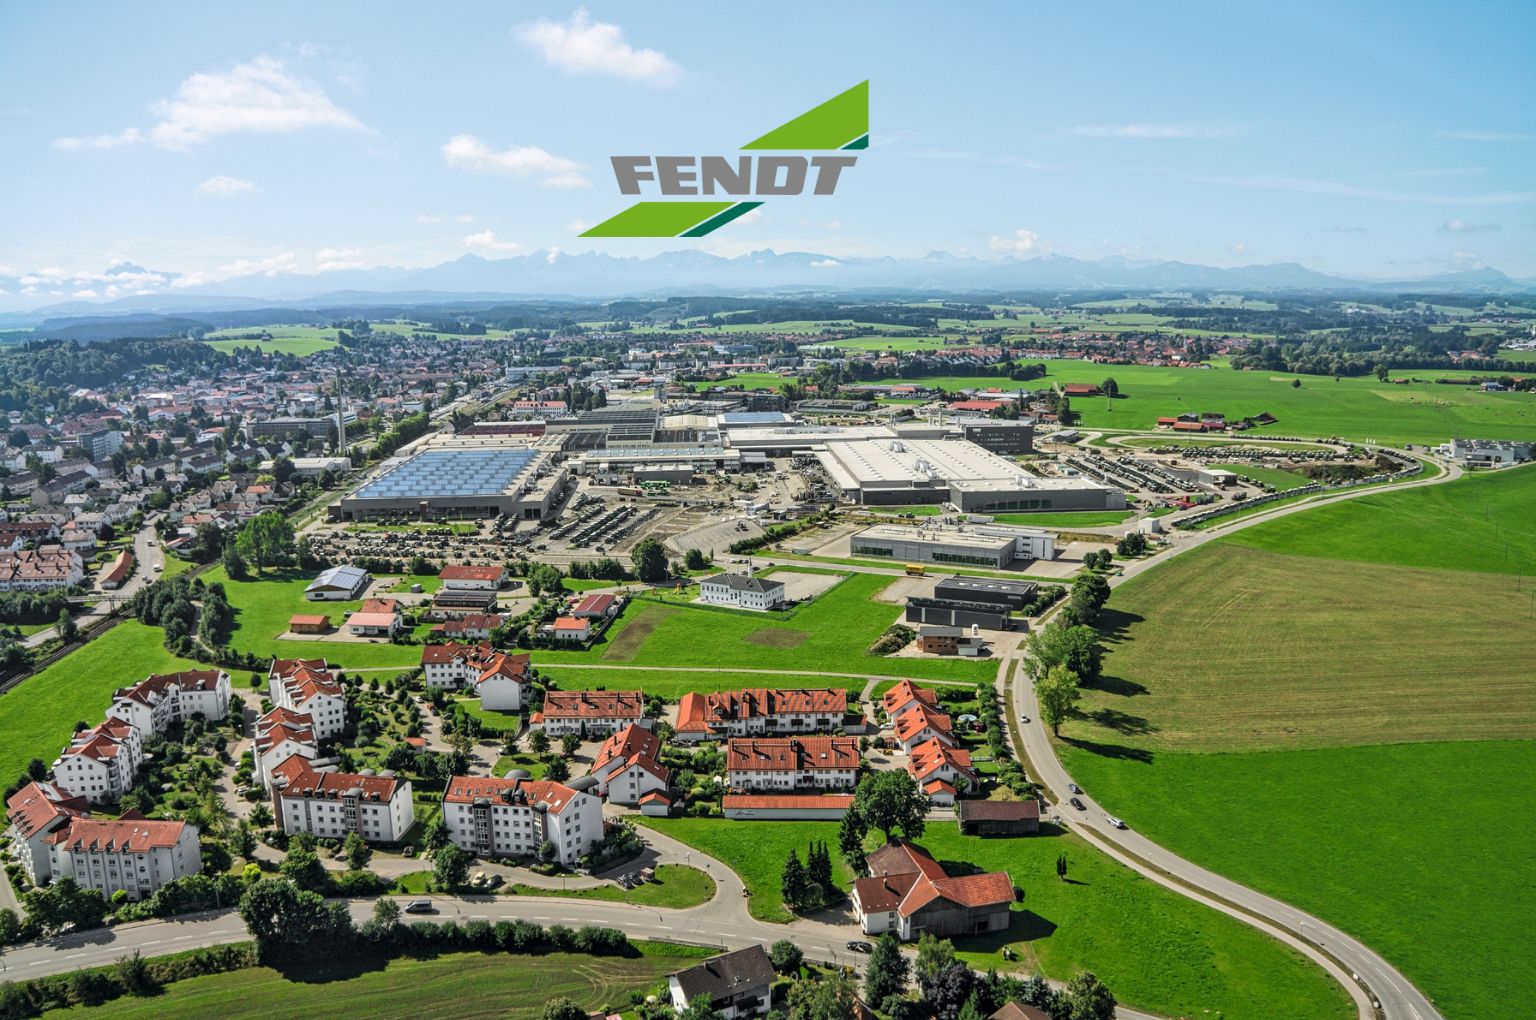 4,355 years working at Fendt